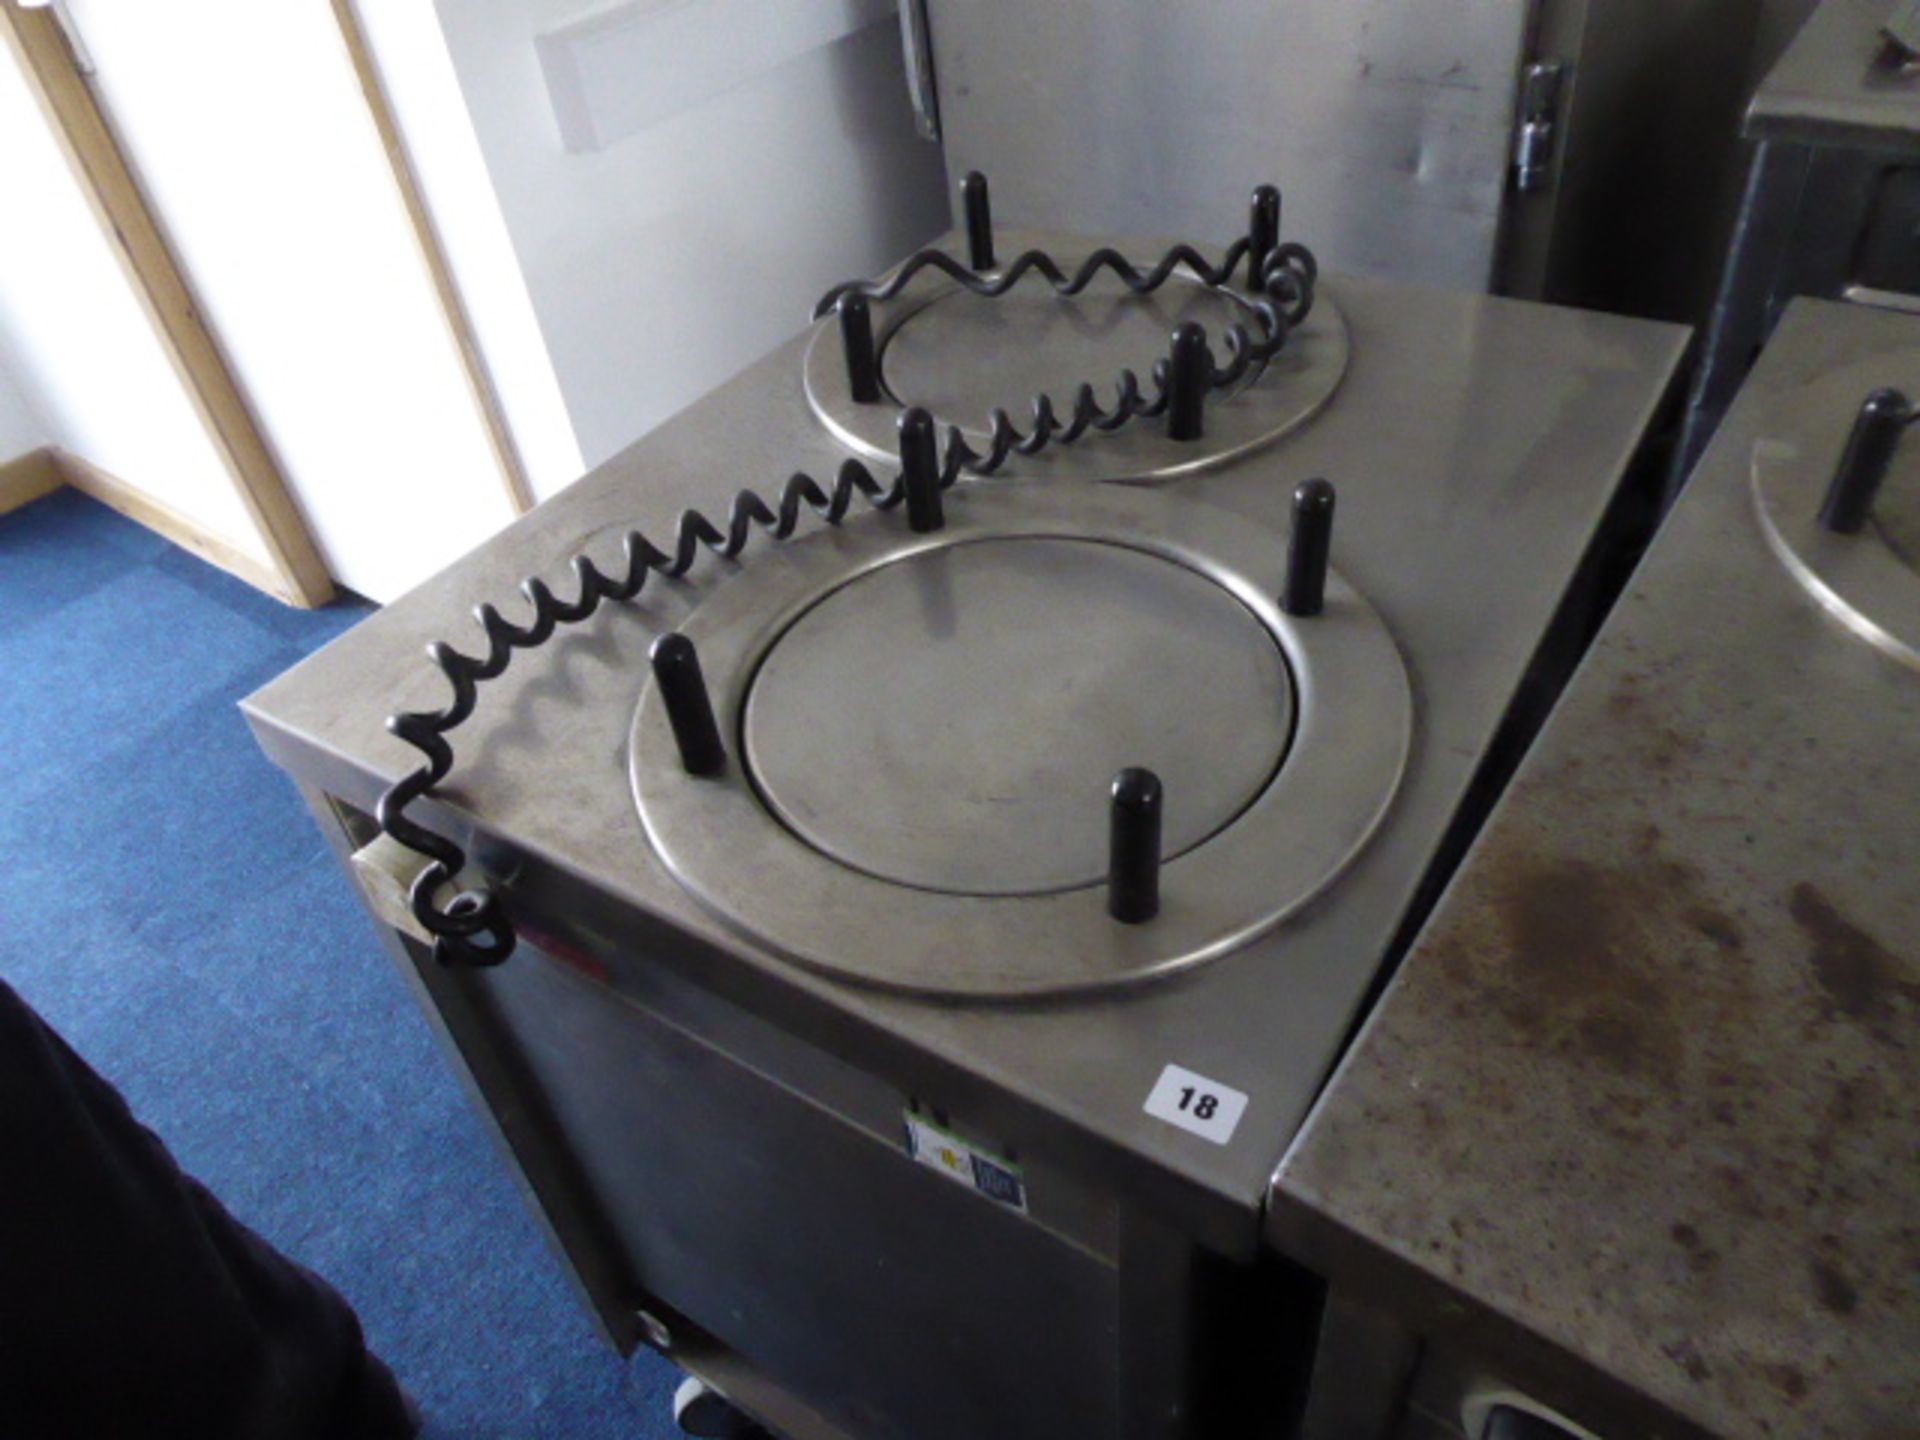 56cm x 70cm Still double plate lowerator with heater on castors